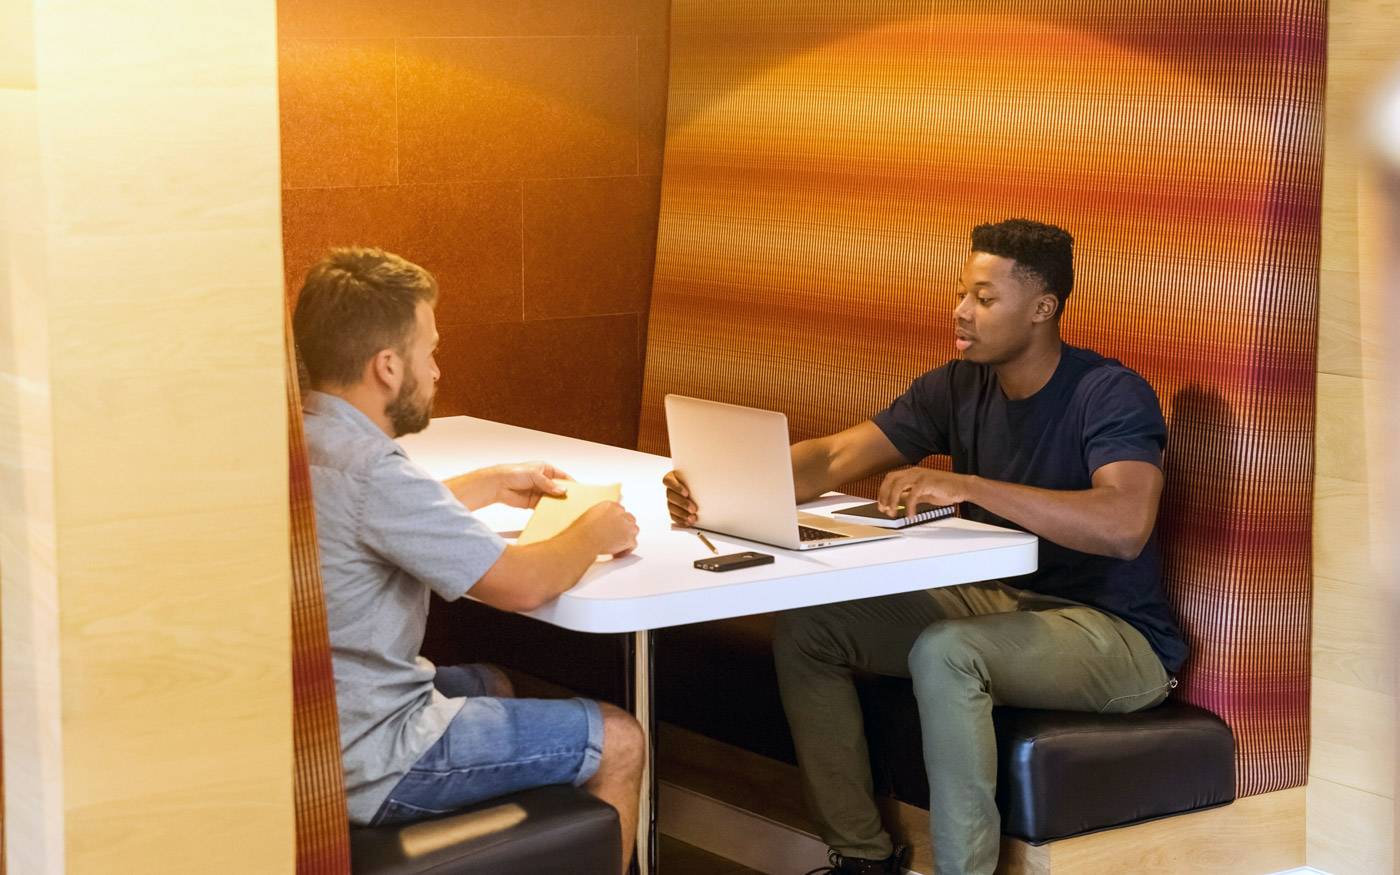 Two people sitting opposite each other, meeting in a booth with a desk between them